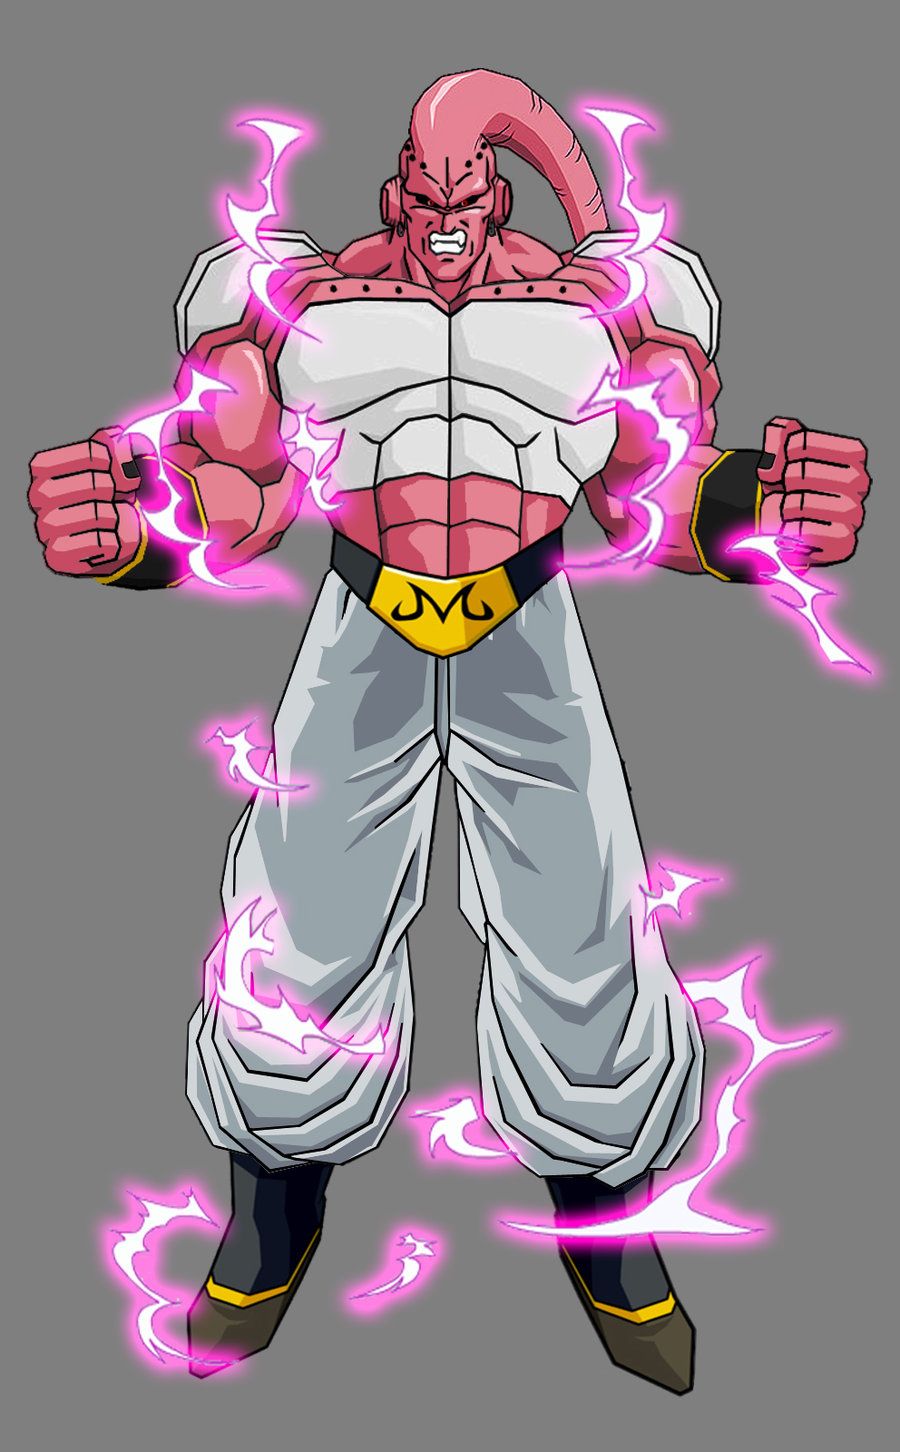 Free download DRAGON BALL Z WALLPAPERS Super Buu android 13